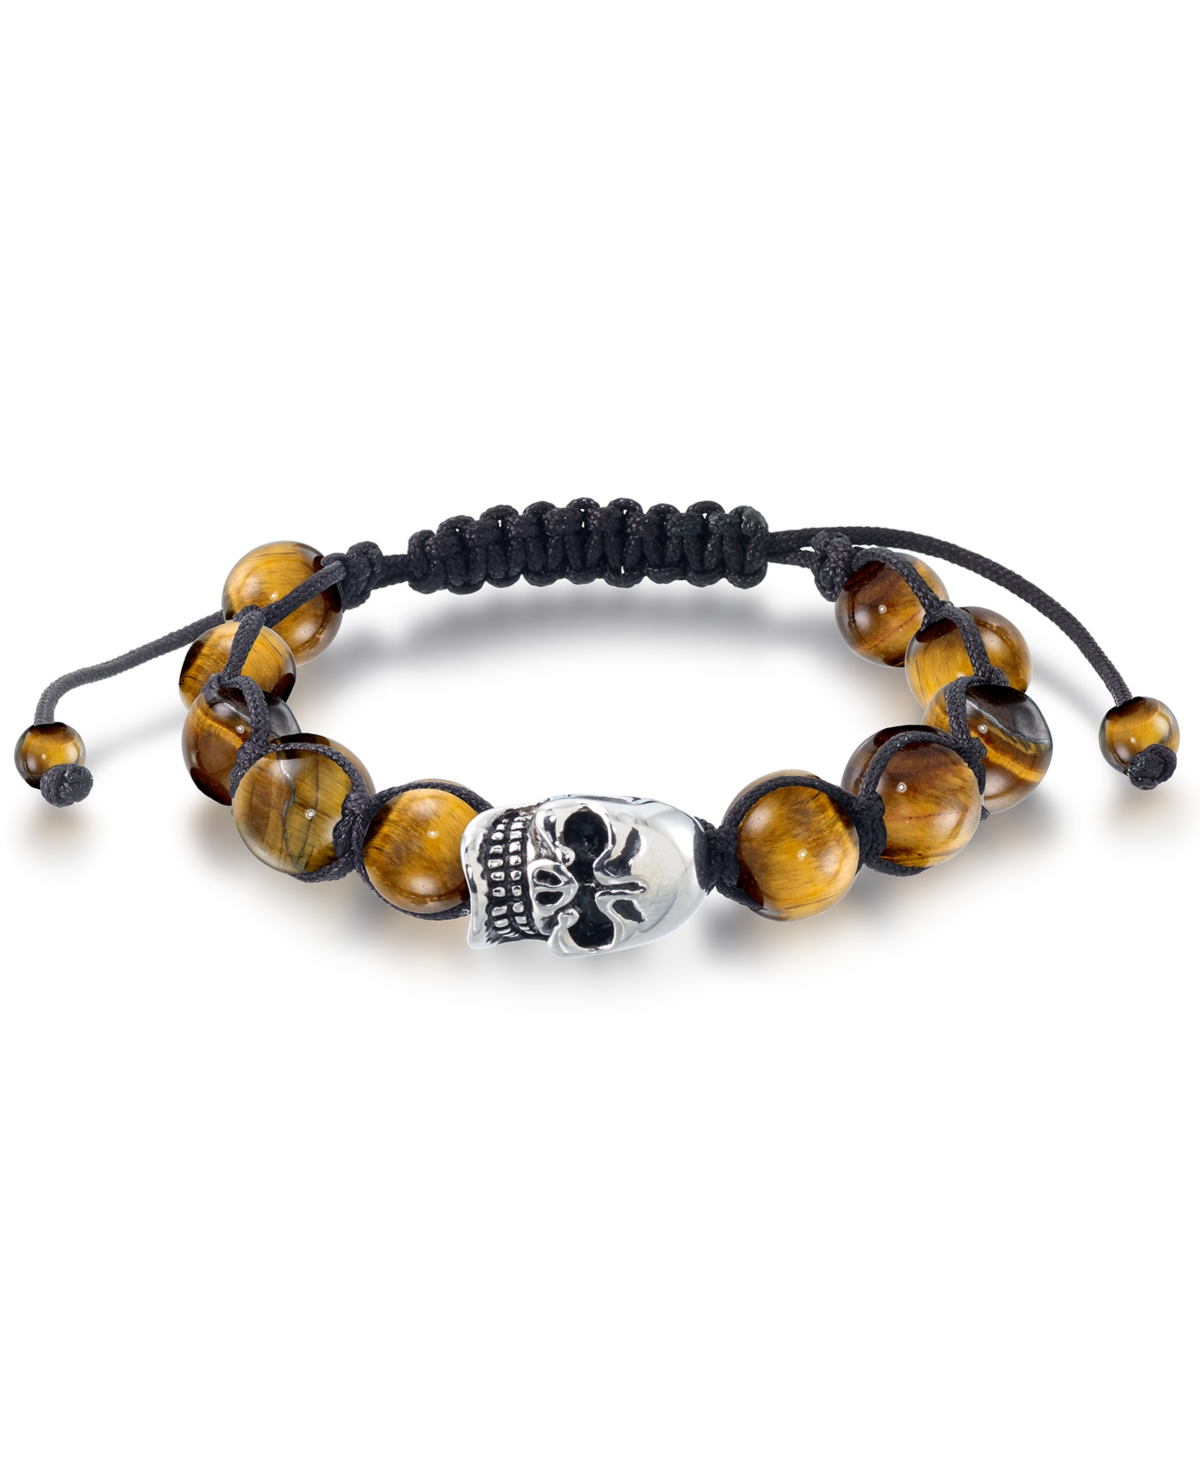 Andrew Charles by Andy Hilfiger Men's Onyx Bead Skull Bolo Bracelet in Stainless Steel (Also in Tiger's Eye & White Agate)